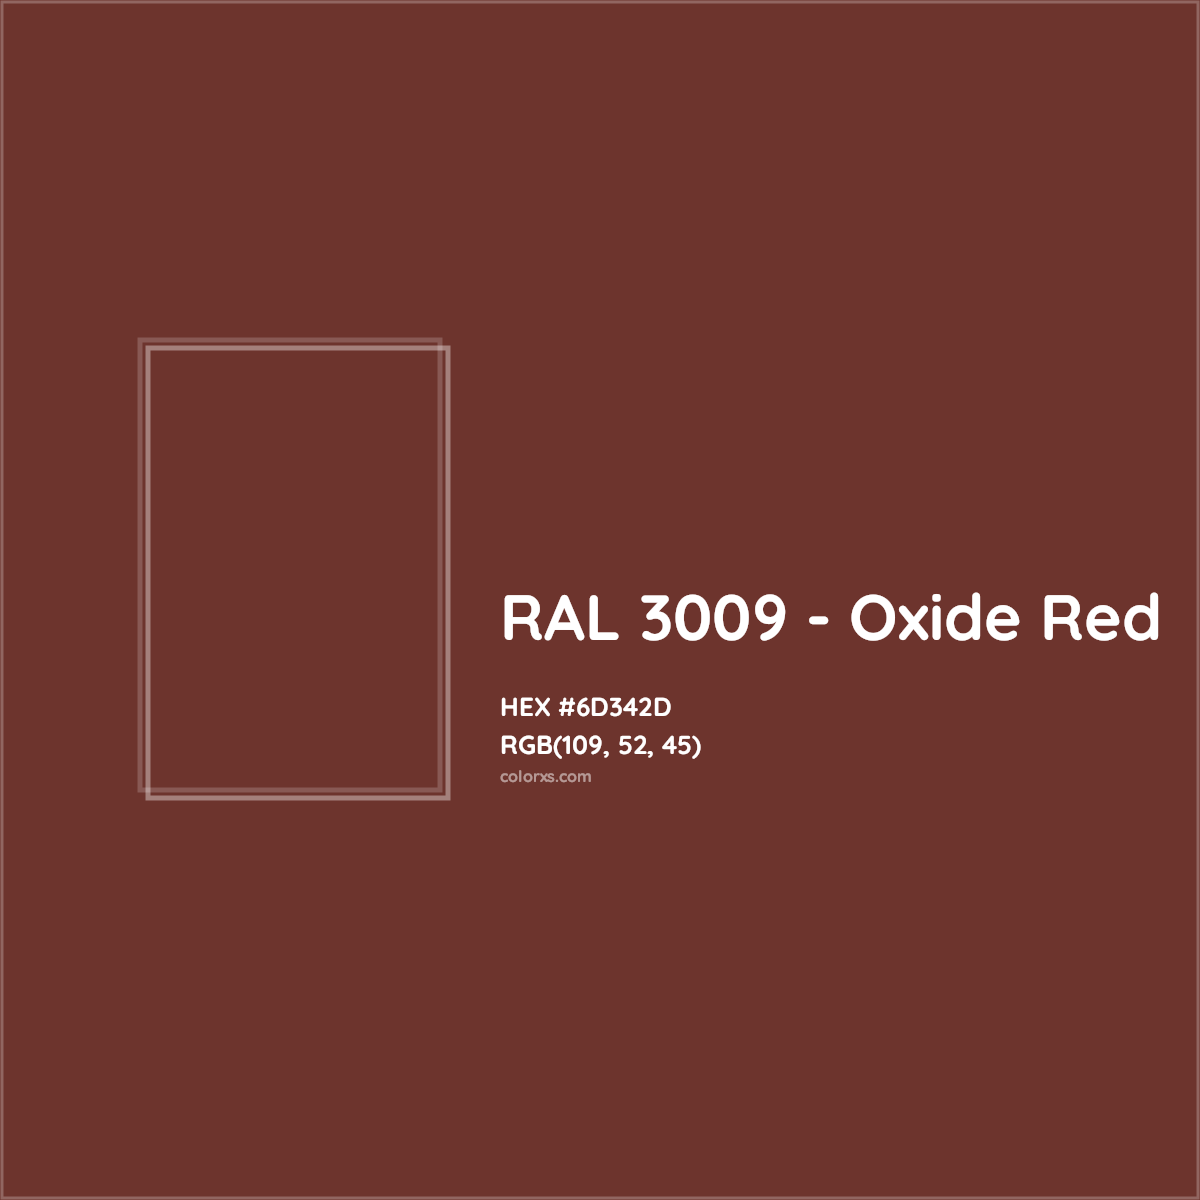 HEX #6D342D RAL 3009 - Oxide Red CMS RAL Classic - Color Code